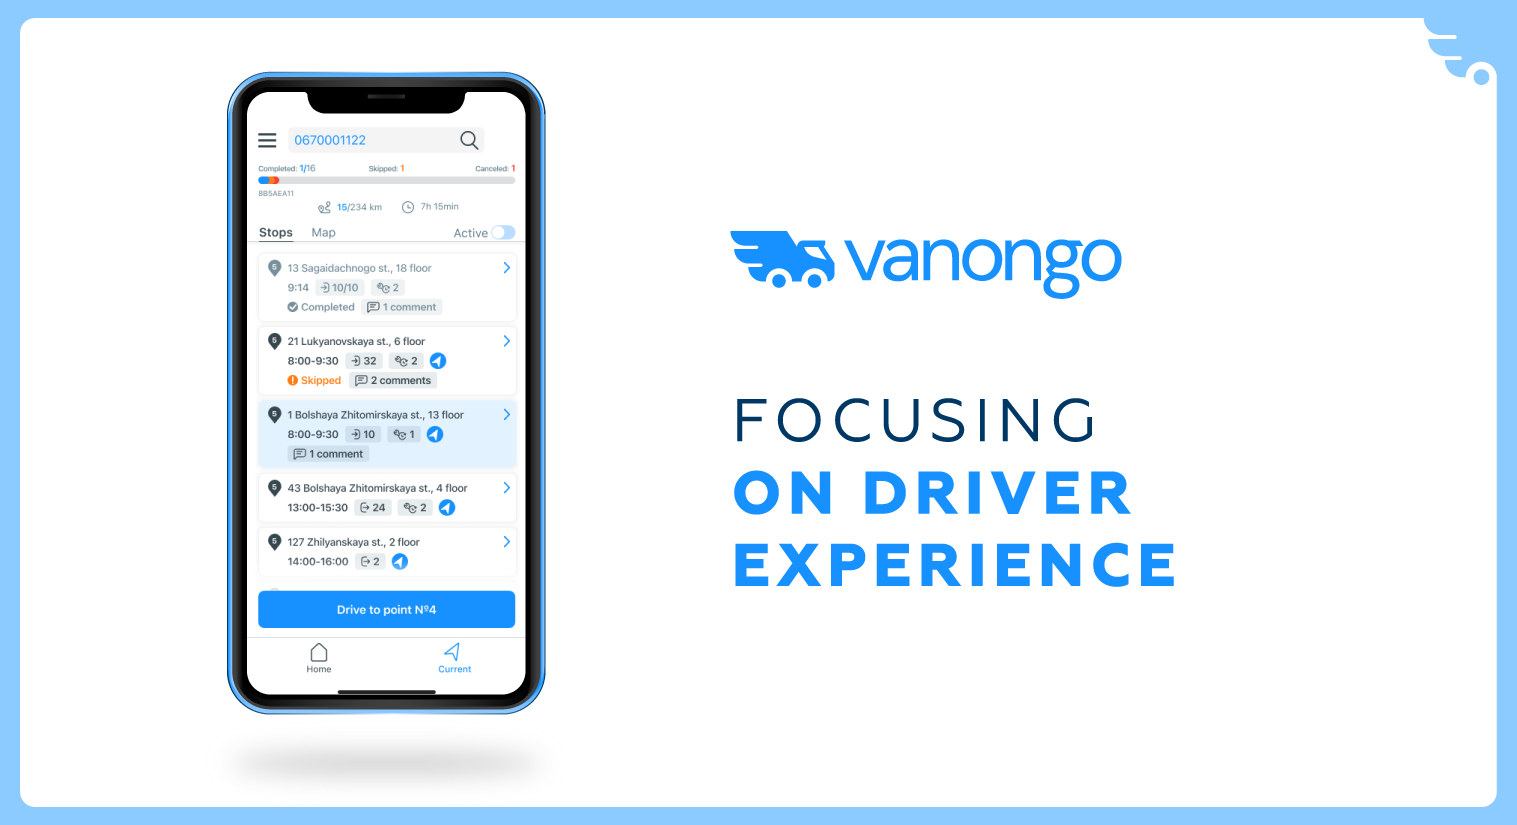 Maximize delivery efficiency with VanOnGo's cutting-edge route optimization technology. Using AI and machine learning, VanOnGo calculates and optimizes routes based on multiple factors such as time, location, and capacity for optimal results.